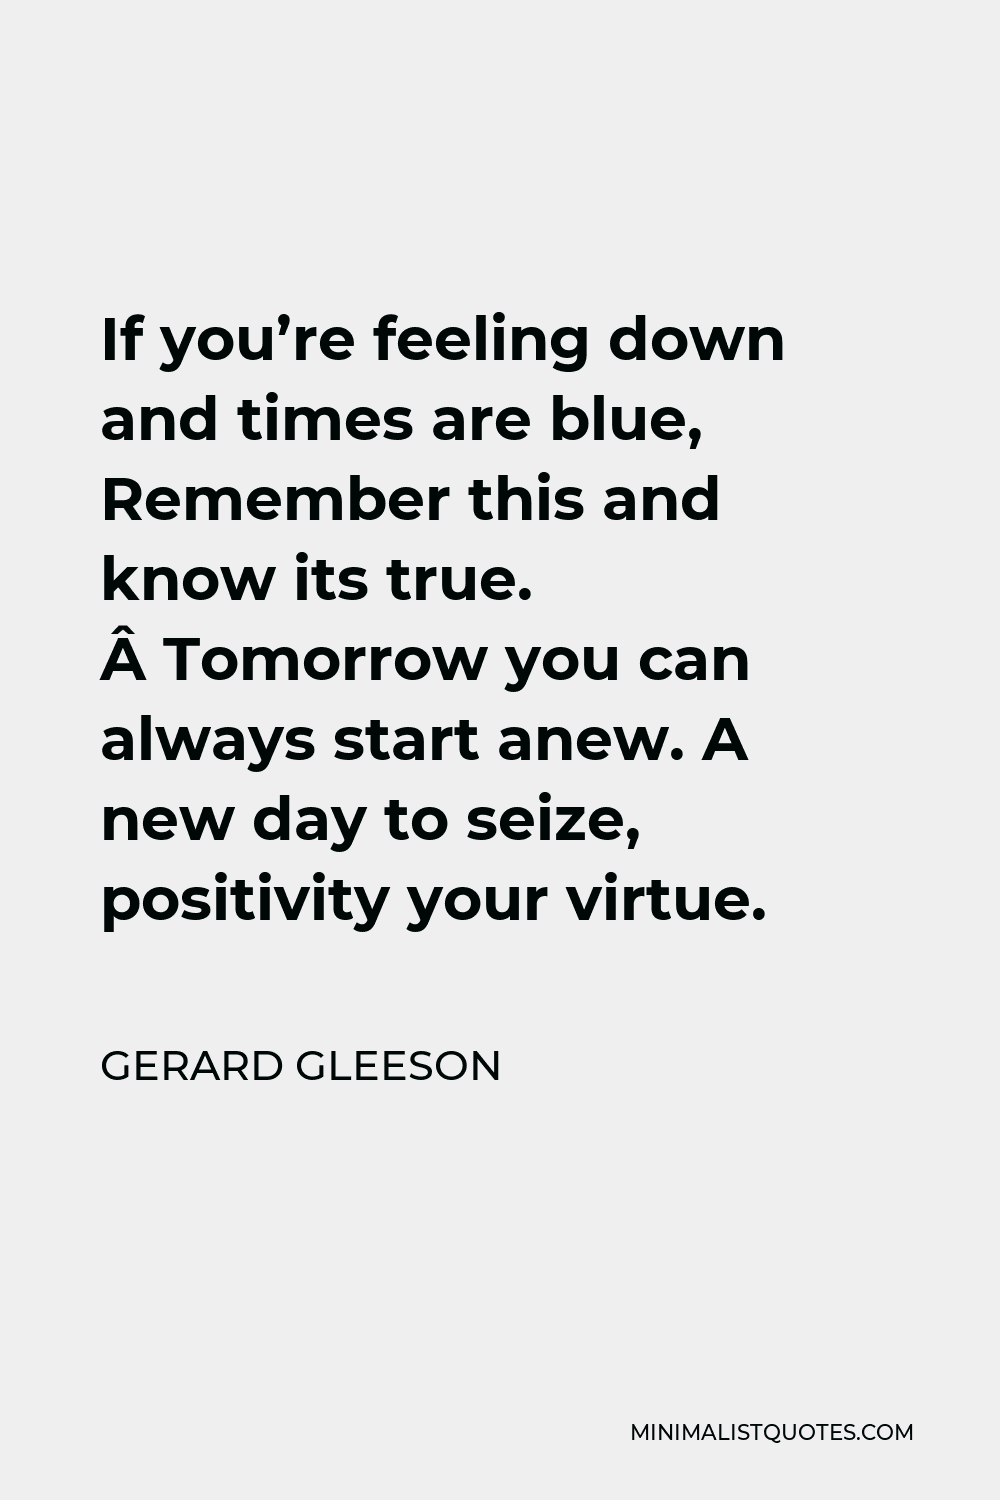 Gerard Gleeson Quote - If you’re feeling down and times are blue, Remember this and know its true.  Tomorrow you can always start anew. A new day to seize, positivity your virtue.